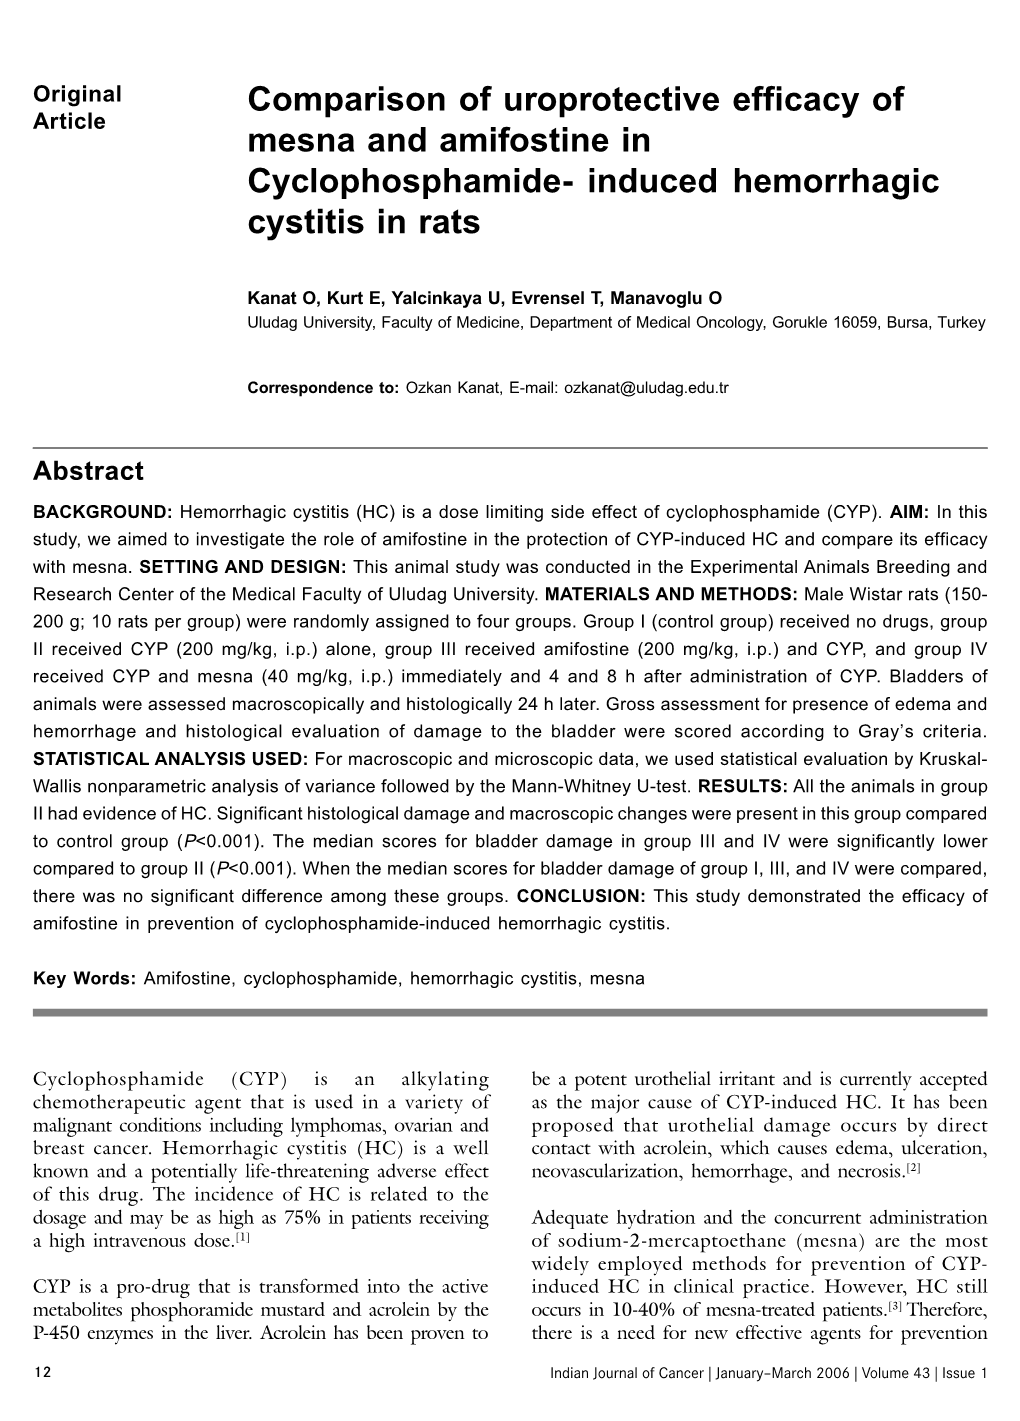 Comparison of Uroprotective Efficacy of Mesna and Amifostine in Cyclophosphamide- Induced Hemorrhagic Cystitis in Rats